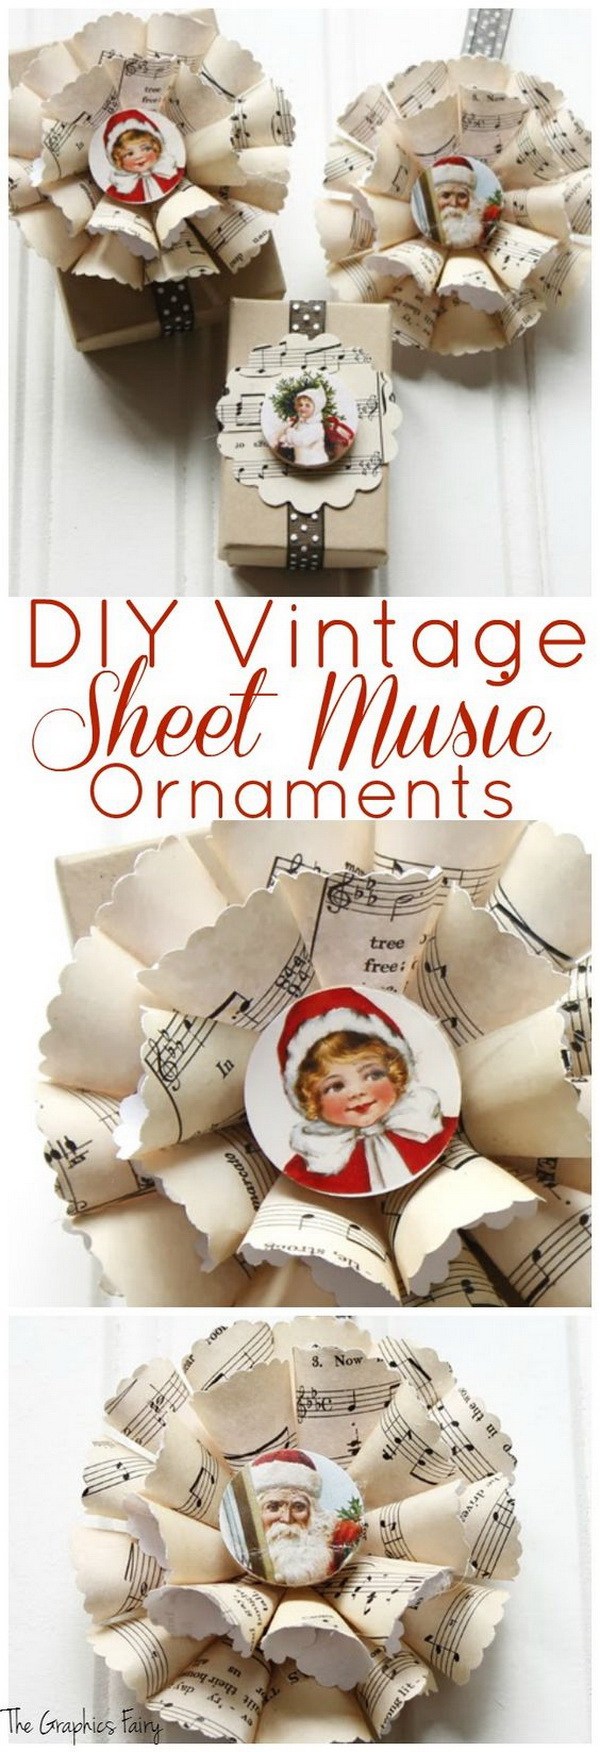 diy vintage sheet music christmas ornaments with sheet music decorating ideas